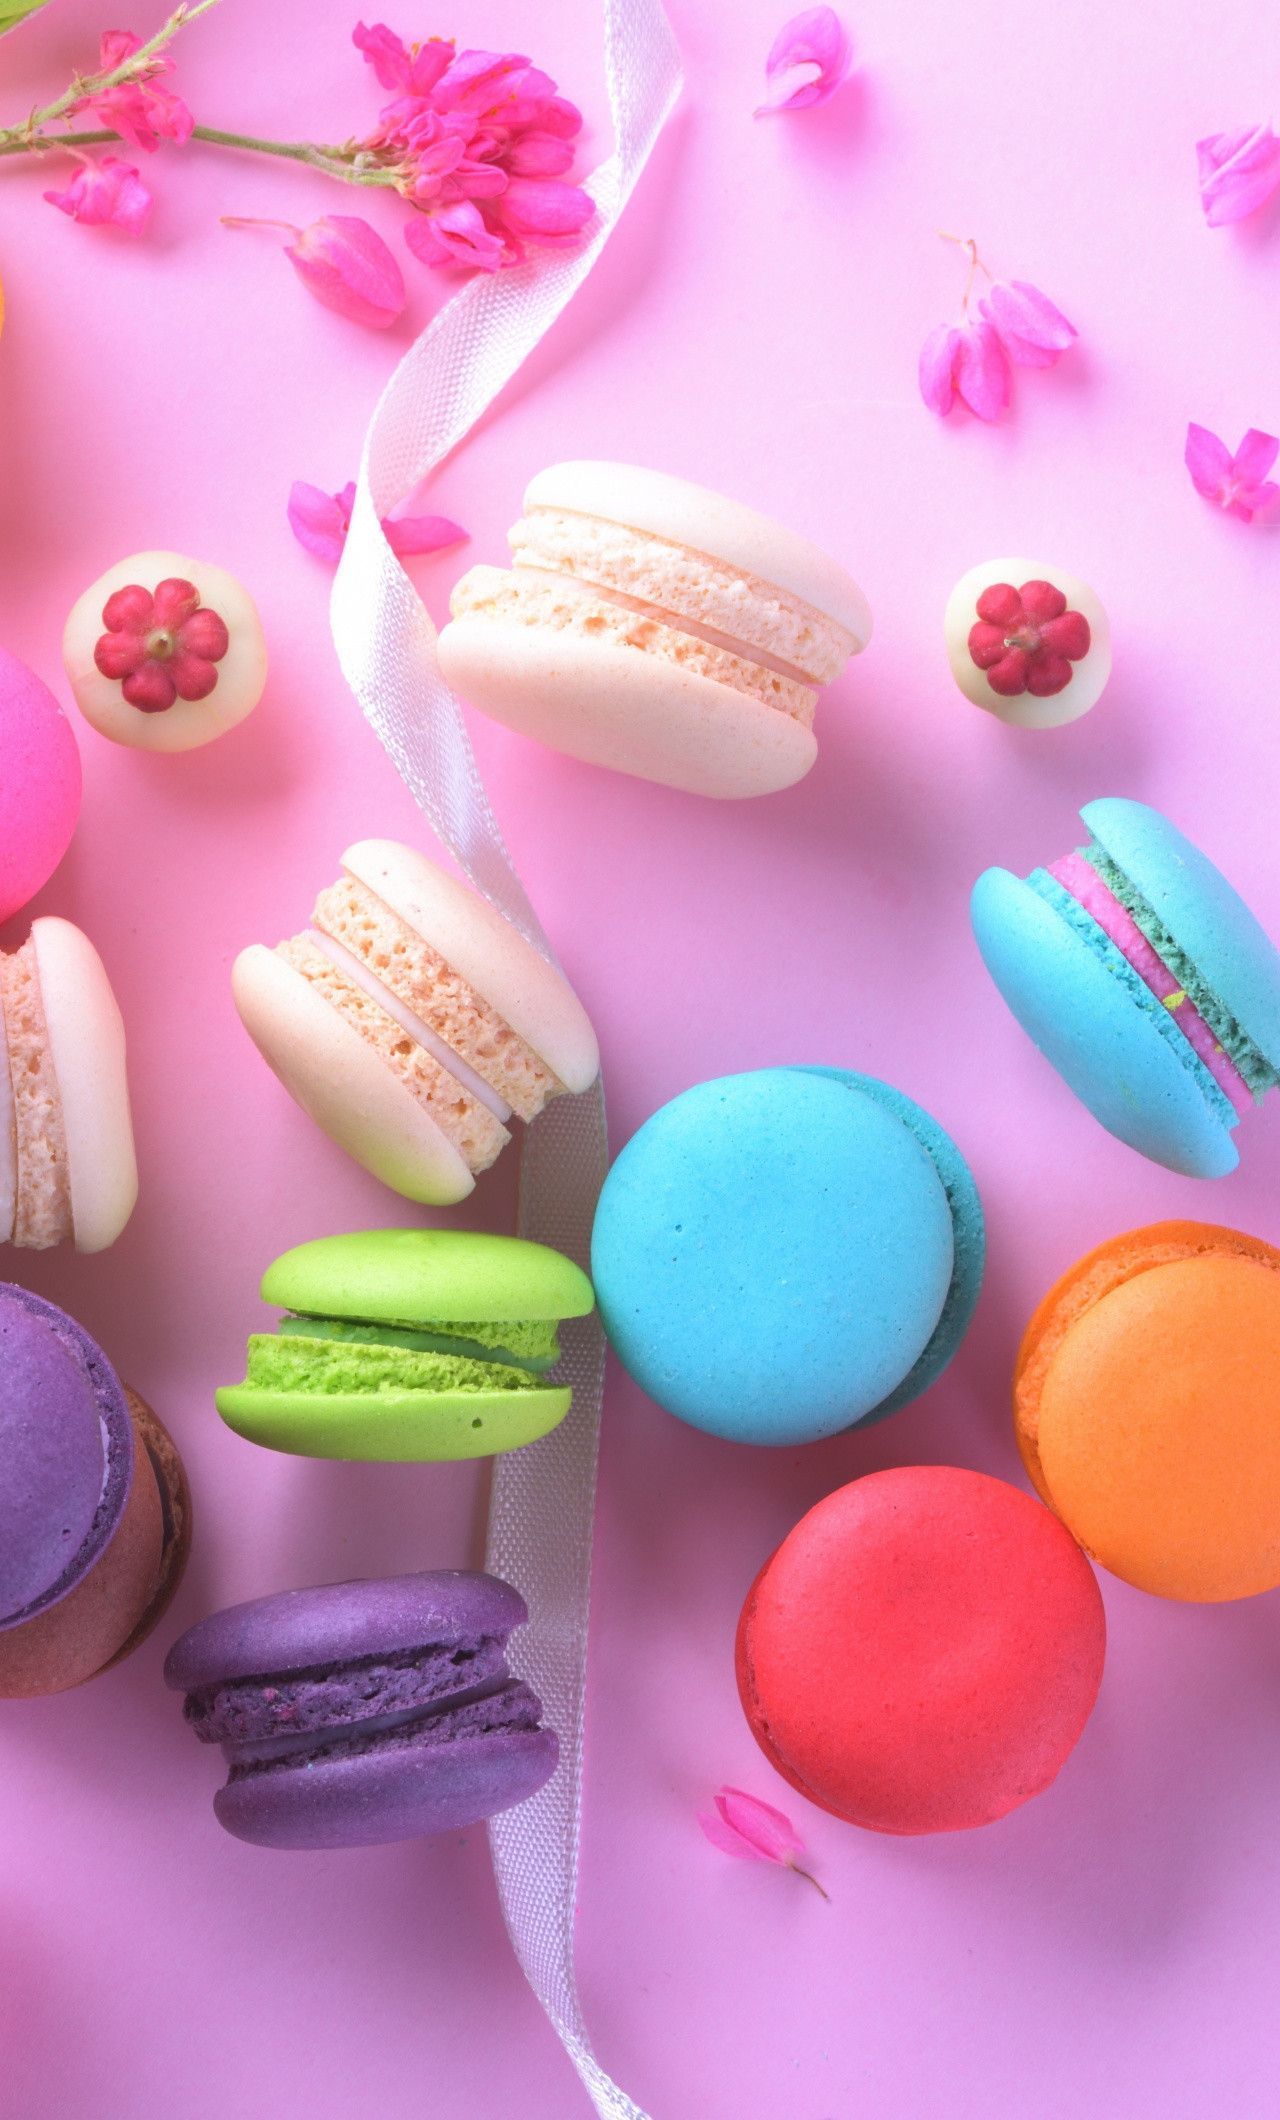 Colorful macarons on a pink background - Macarons